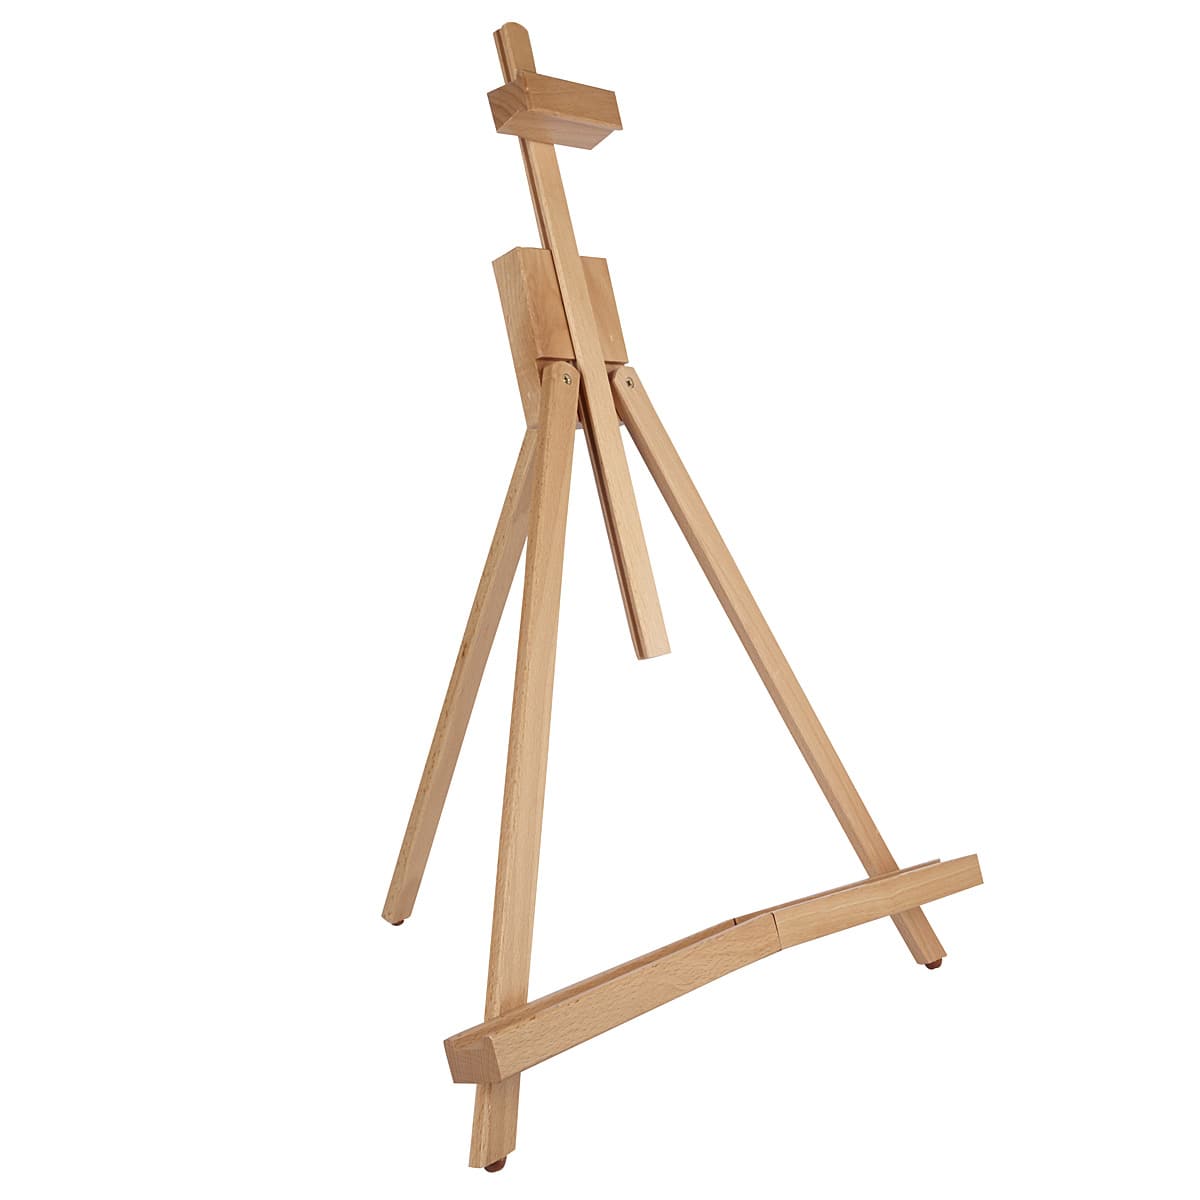 Black Traditional Easel by Ivory and Iris | 7.9 x 7.85 x 13.4 | Michaels